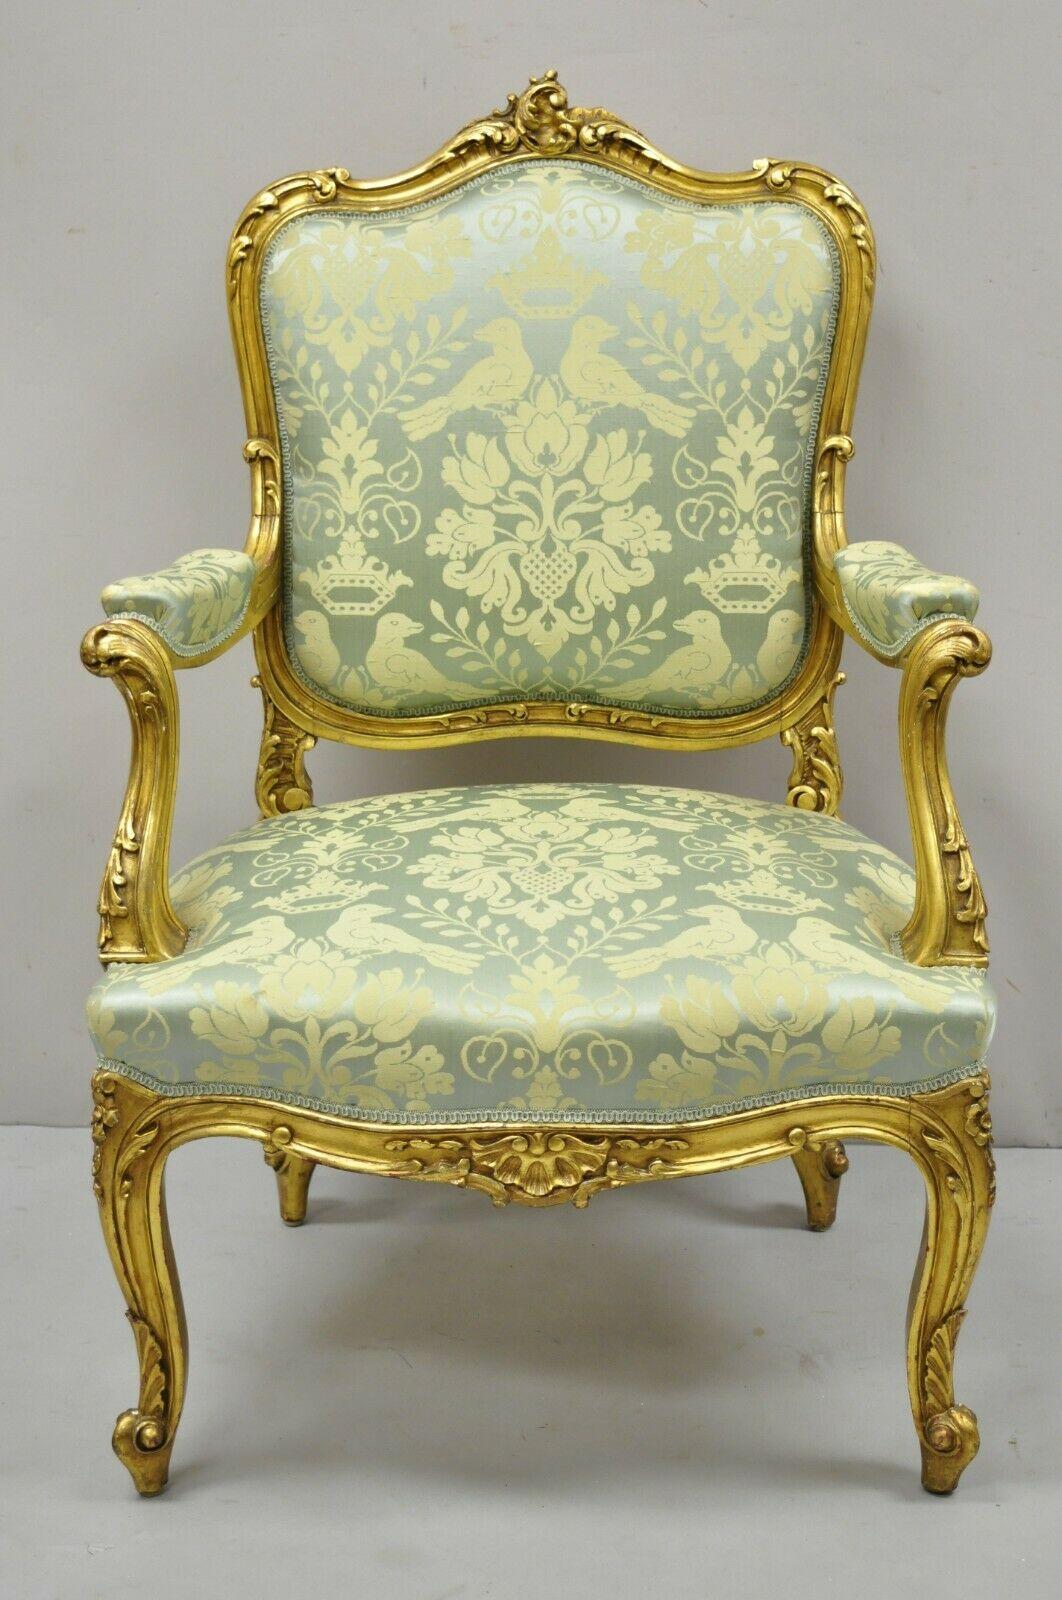 Antique French Rococo Louis XV Victorian Gold Giltwood Green Silk Parlor Chair. Item features a carved gold giltwood frame, green silk upholstery, upholstered armrests, nicely carved details, cabriole legs, very nice antique item, great style and